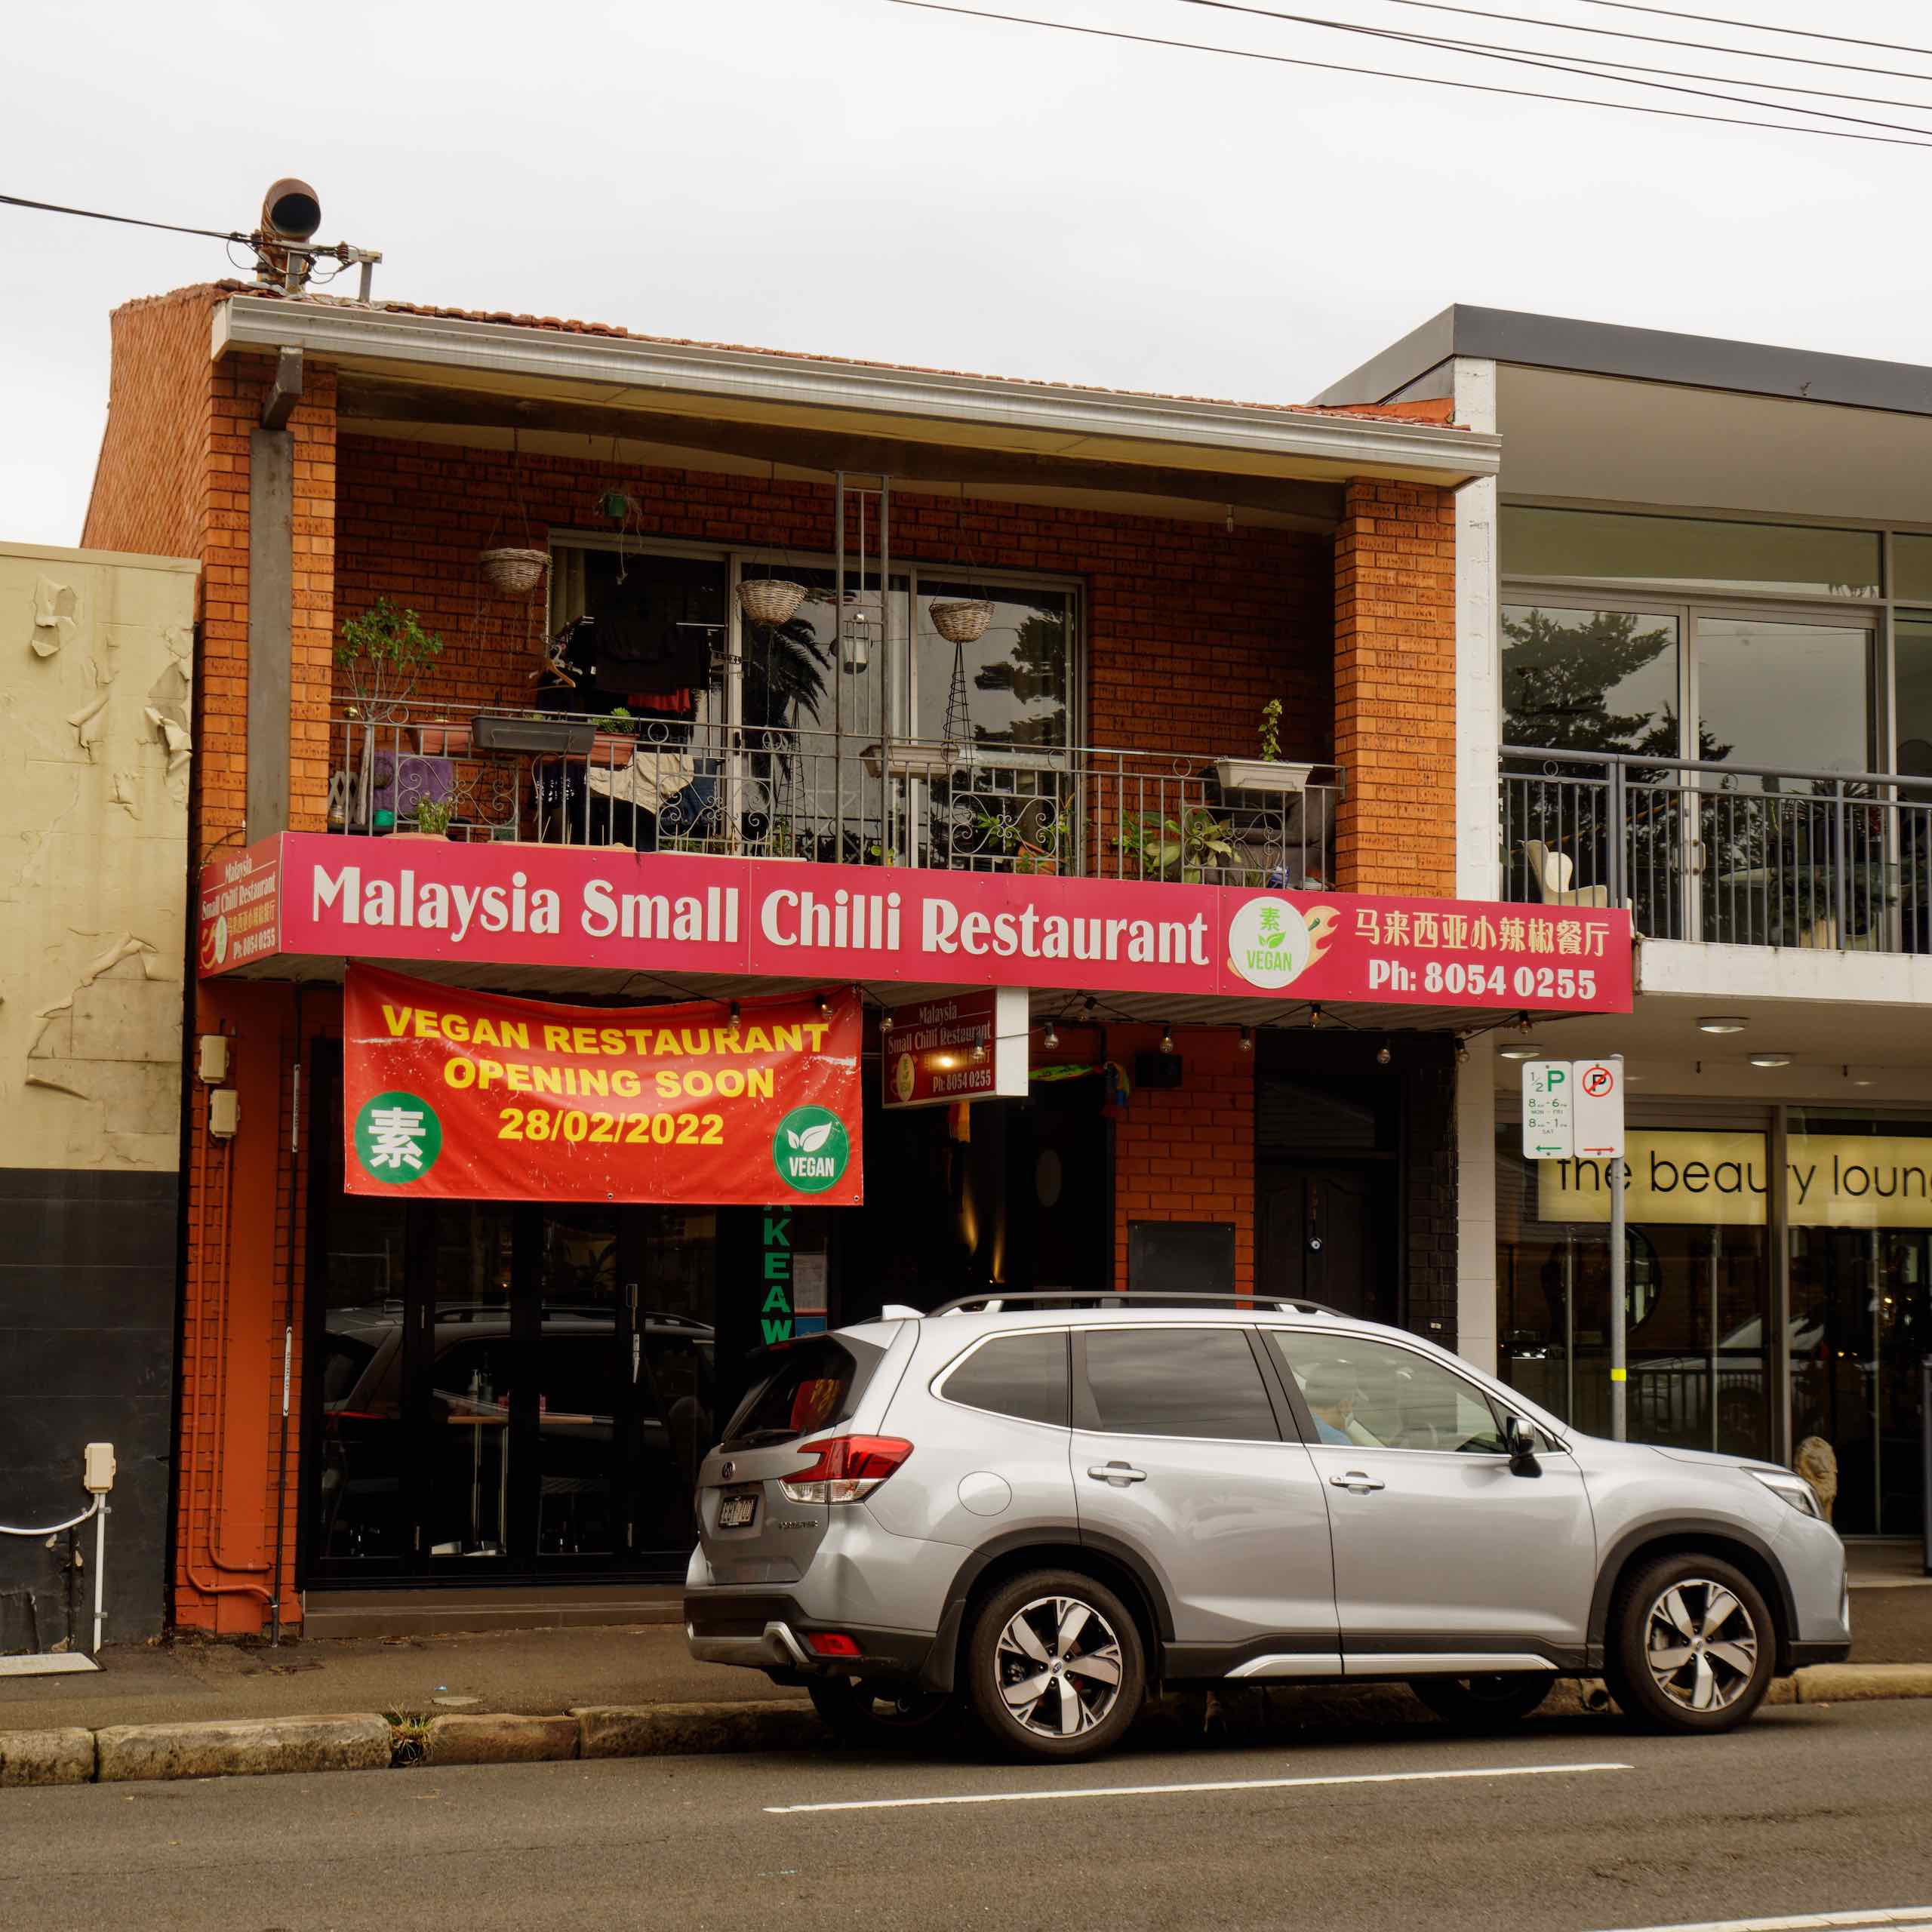 Lunch at Malaysian Small Chillies Vegetarian featured image